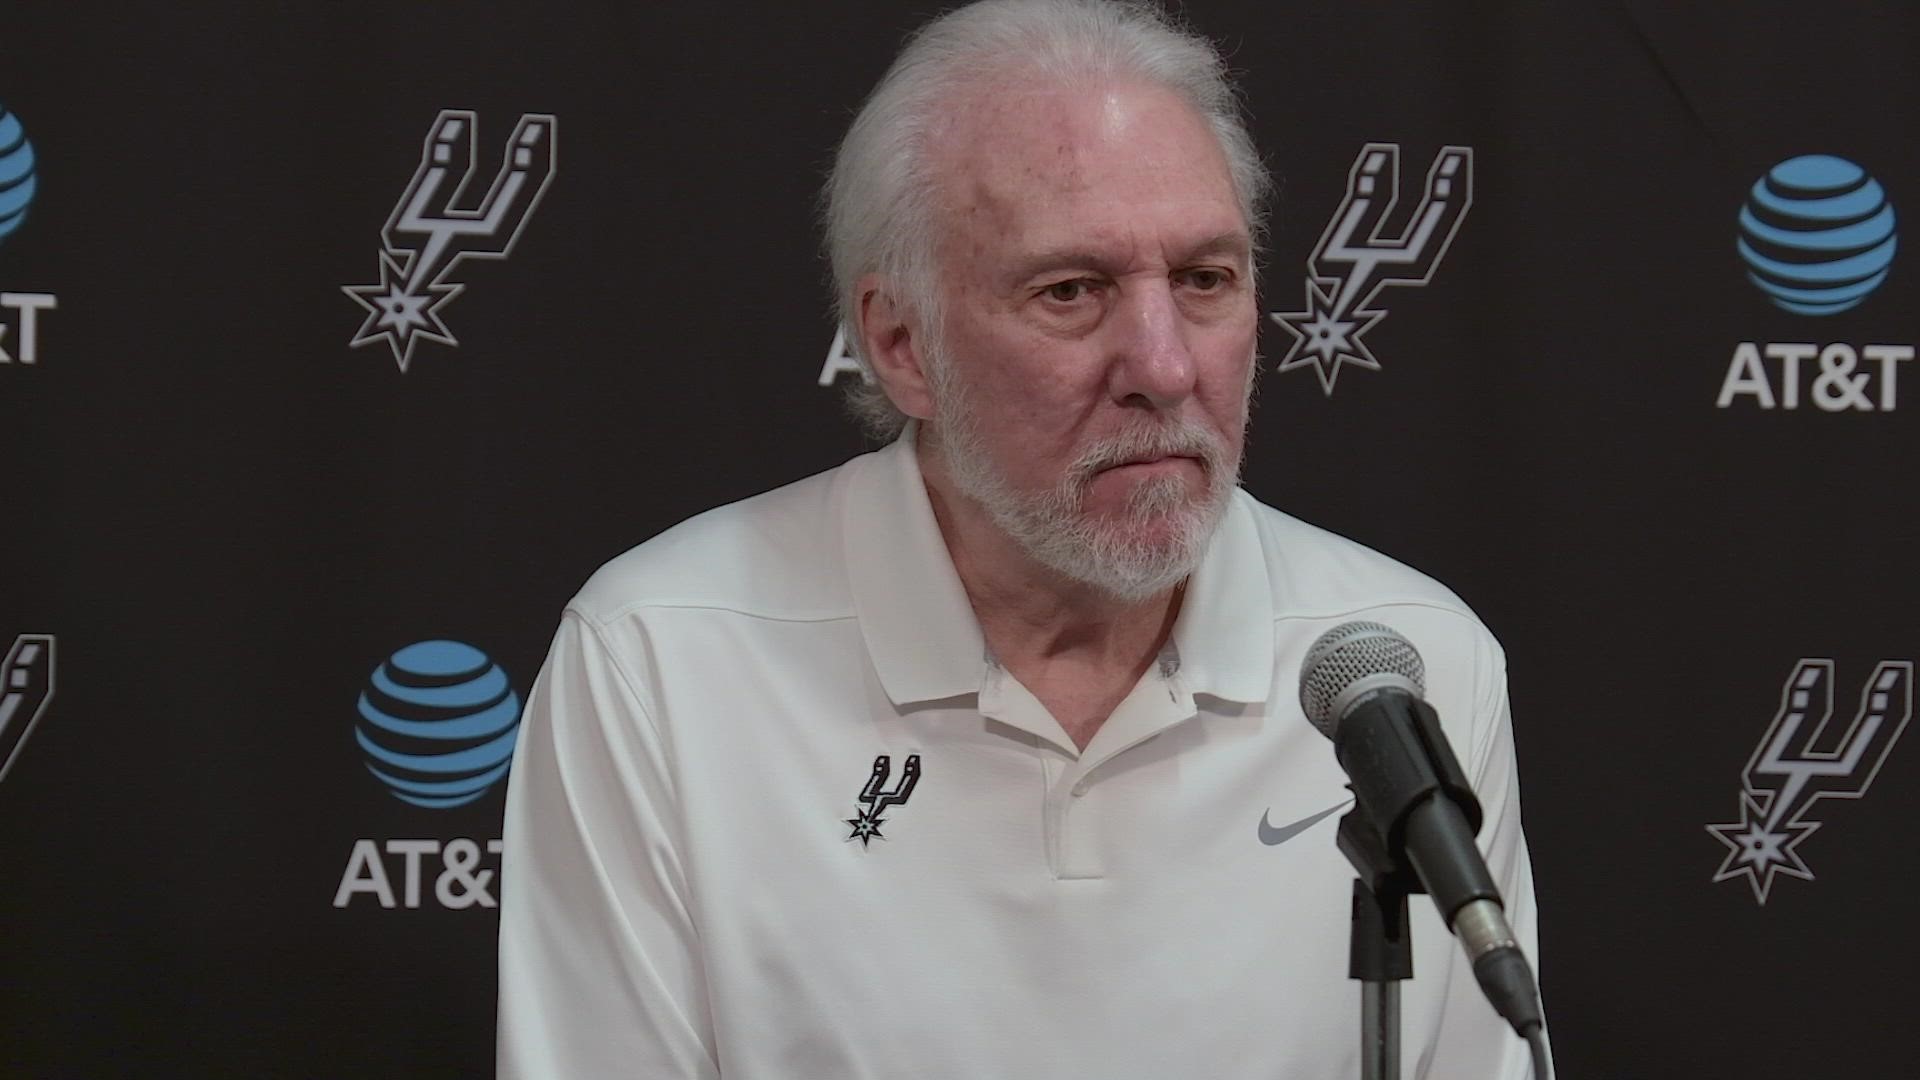 "If you make a basketball cut and aren't lazy with it, you're going to be rewarded. He sees it, and he's going to throw it every time," Pop said of the veteran.